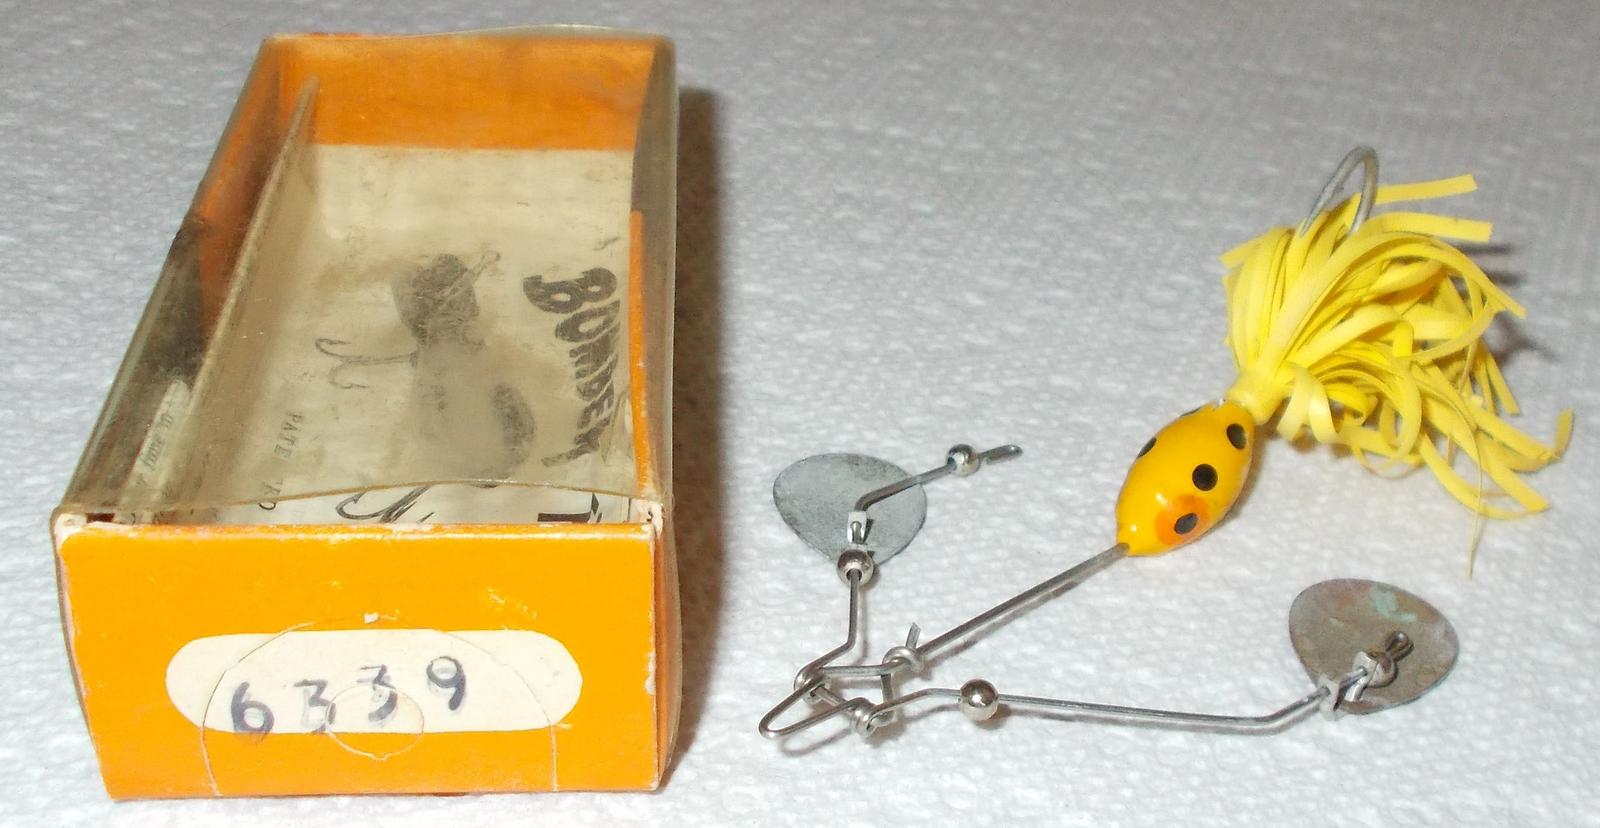 3 Vintage Bomber Fishing Lure With Original Box and Papers / Antique  Fishing Lure Bomber Bait Co / Vintage Bomber Bushwhacker 